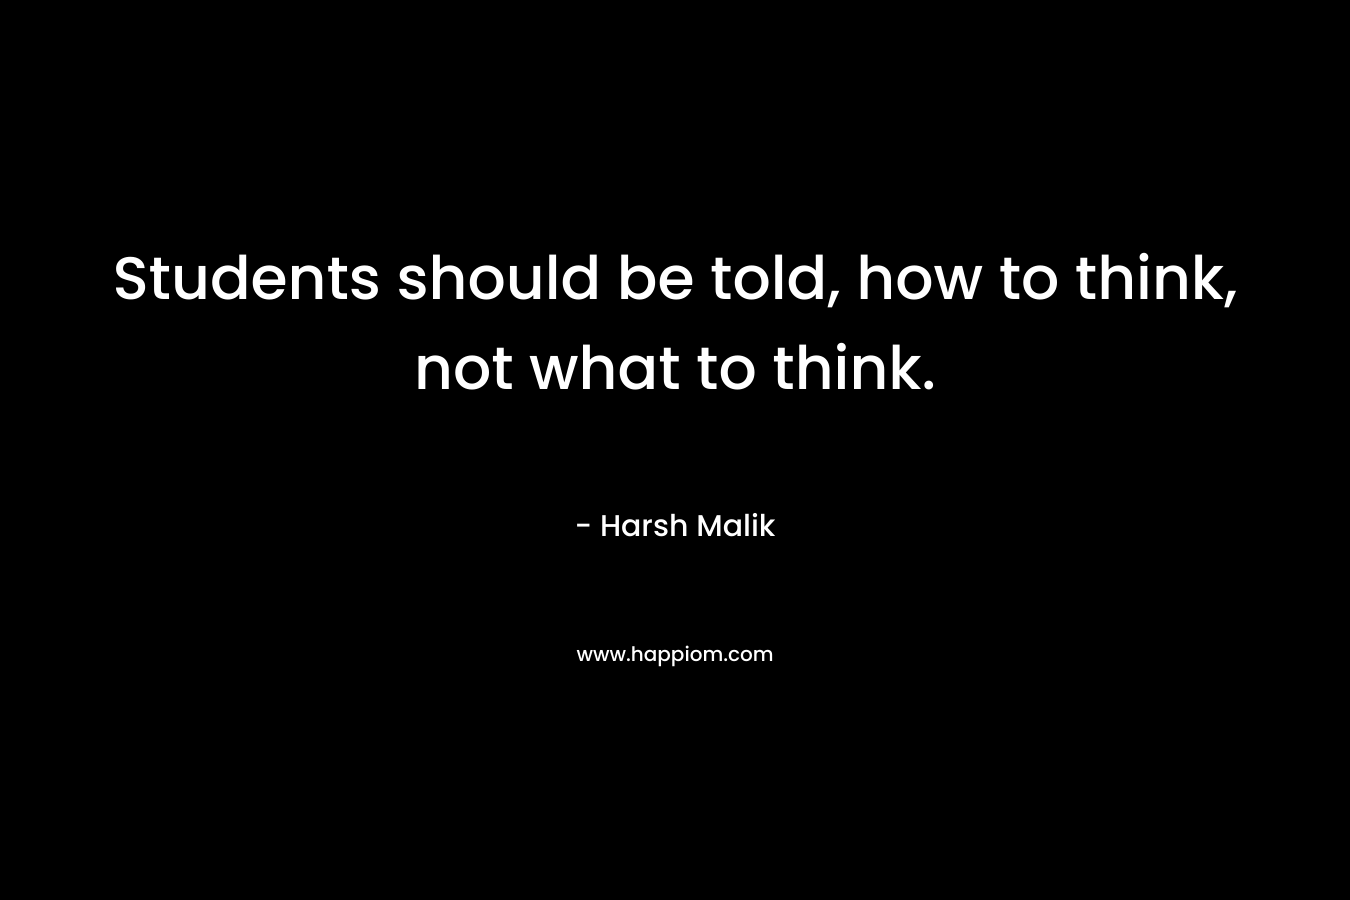 Students should be told, how to think, not what to think.